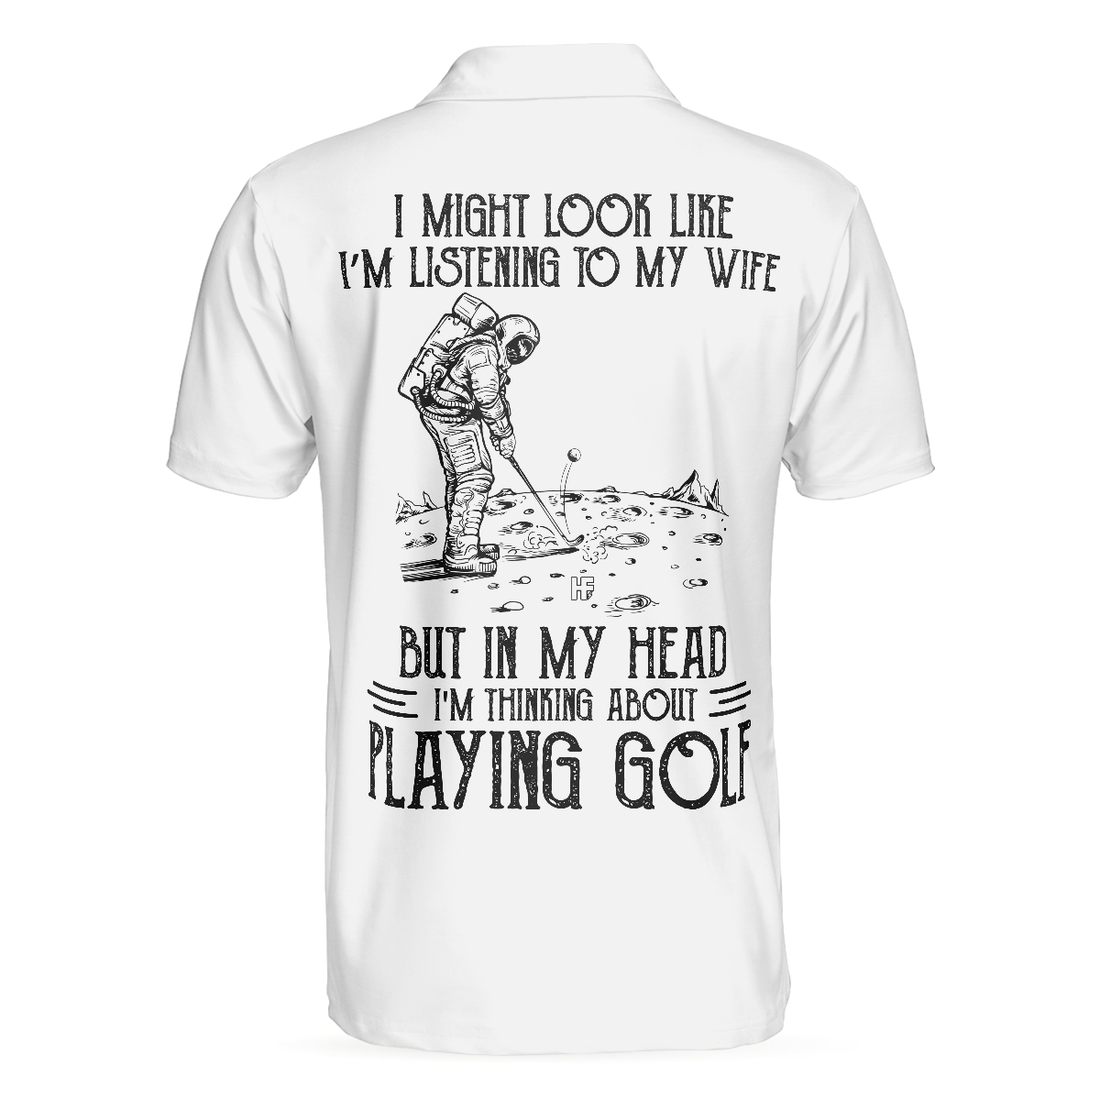 Playing Golf In My Head While Listening To My Wife Polo Shirt For Men Black And White Astronaut Golfer Polo Shirt - 1